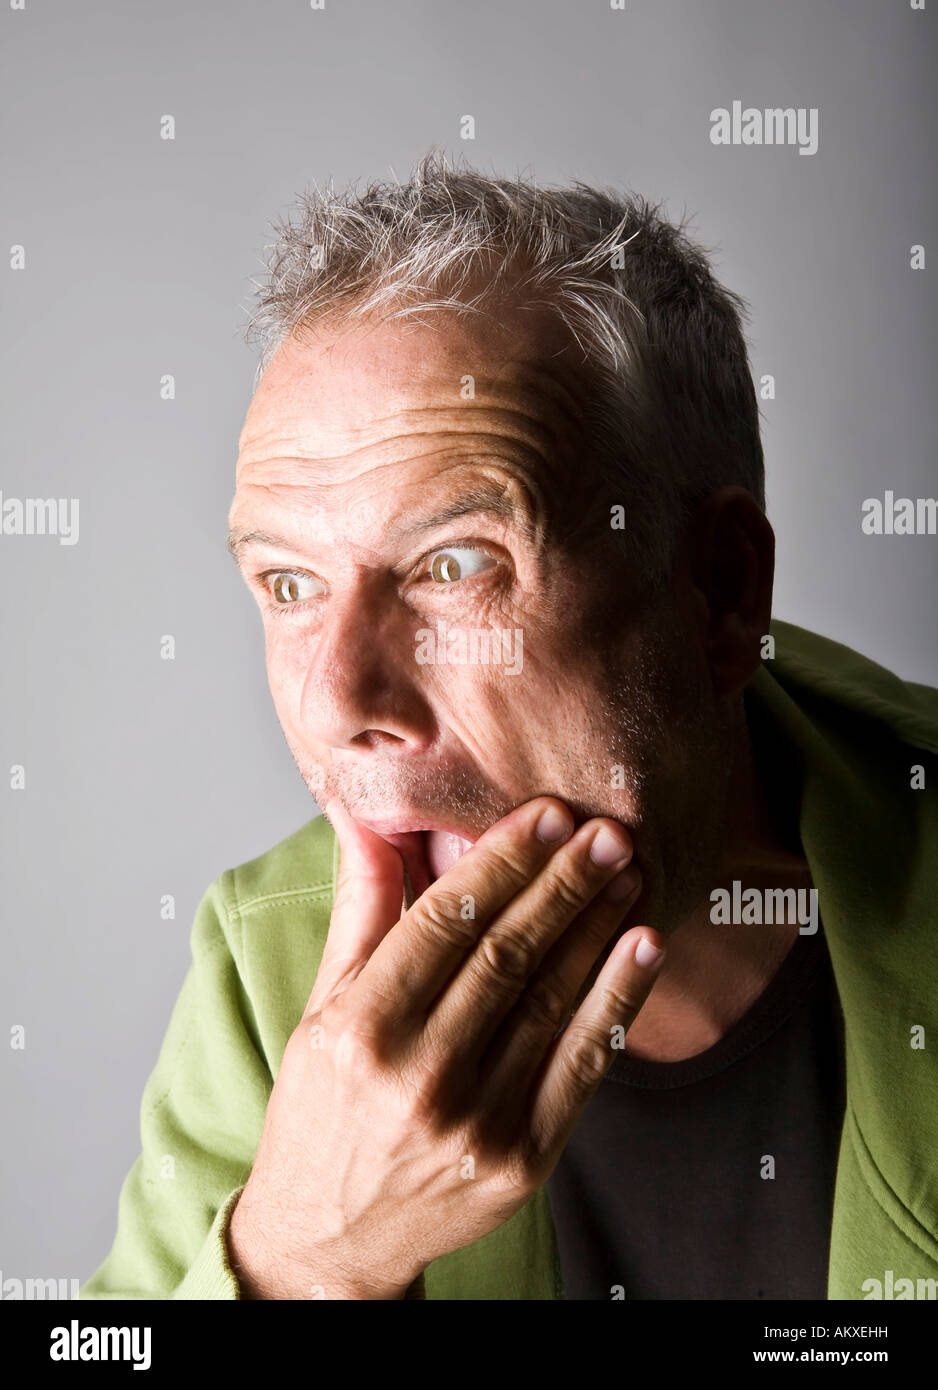 Portrait of a stunned man Stock Photo